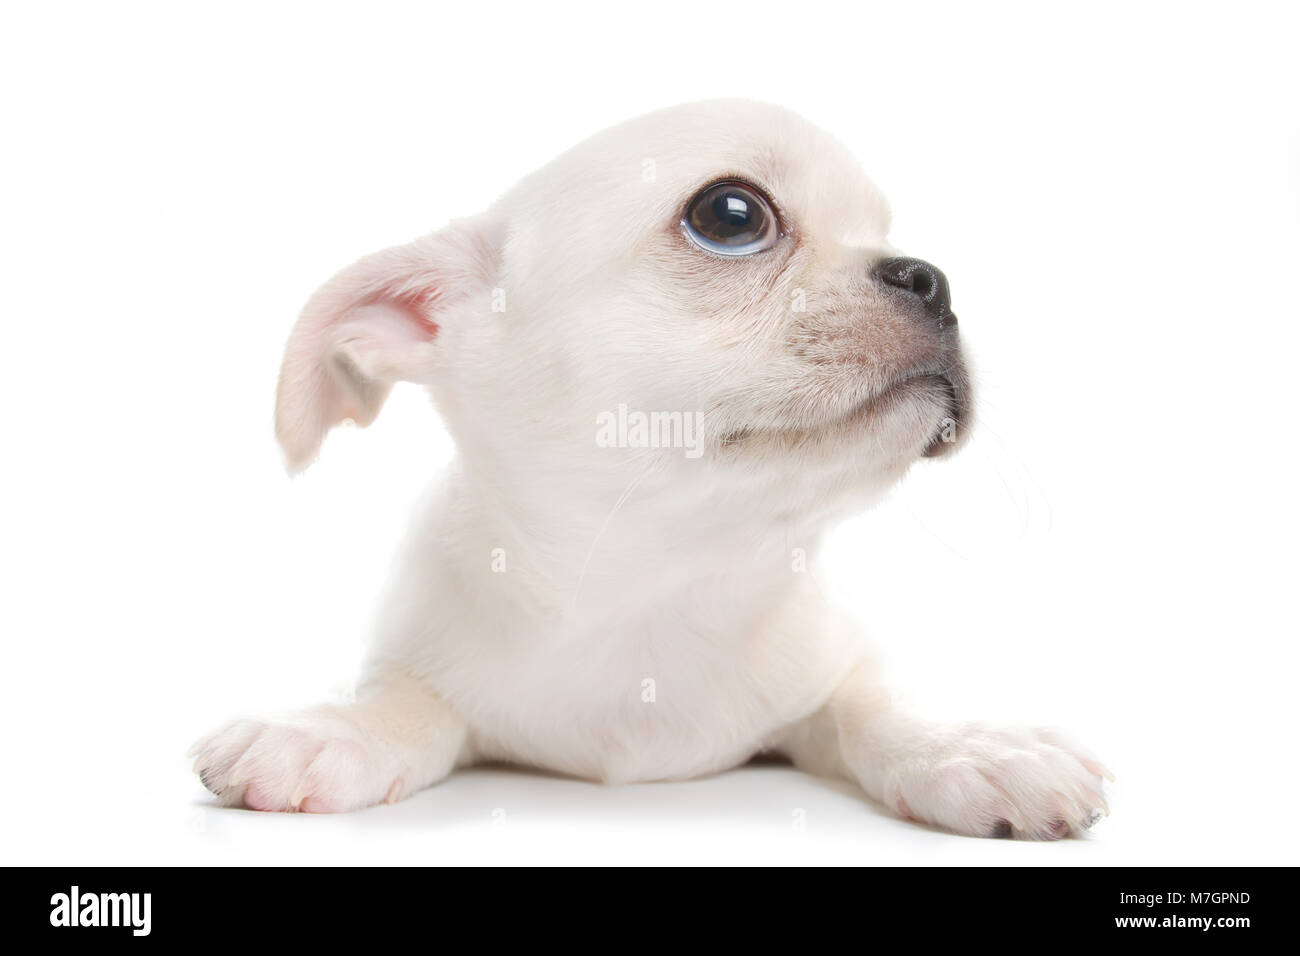 Small cute white chihuahua puppy. Wide angle view, isolated on white Stock Photo